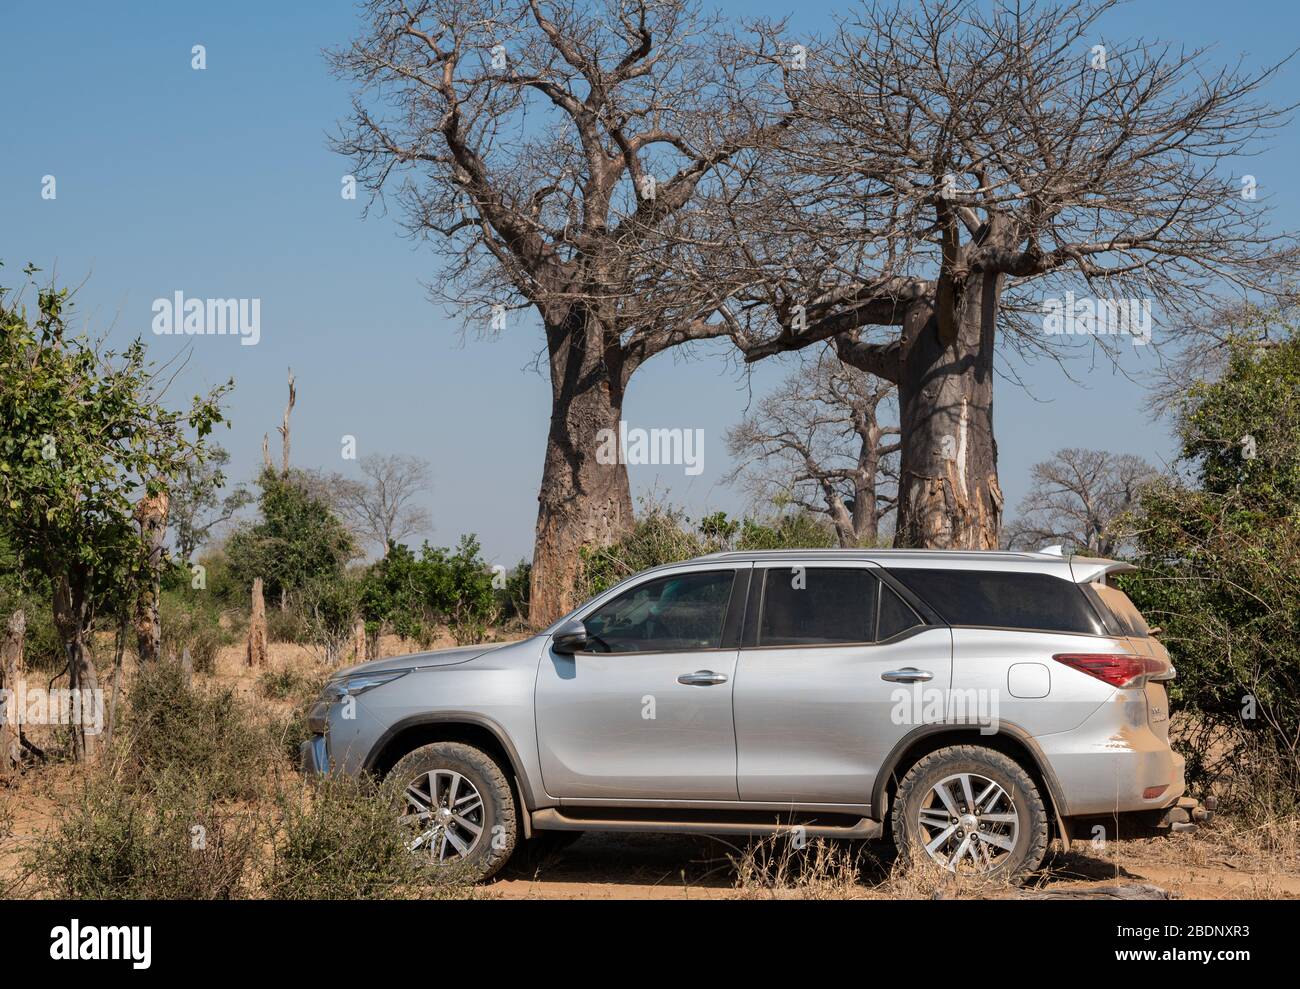 A vehicle in Gonarezhou with magnificent baobab trees in the background Stock Photo